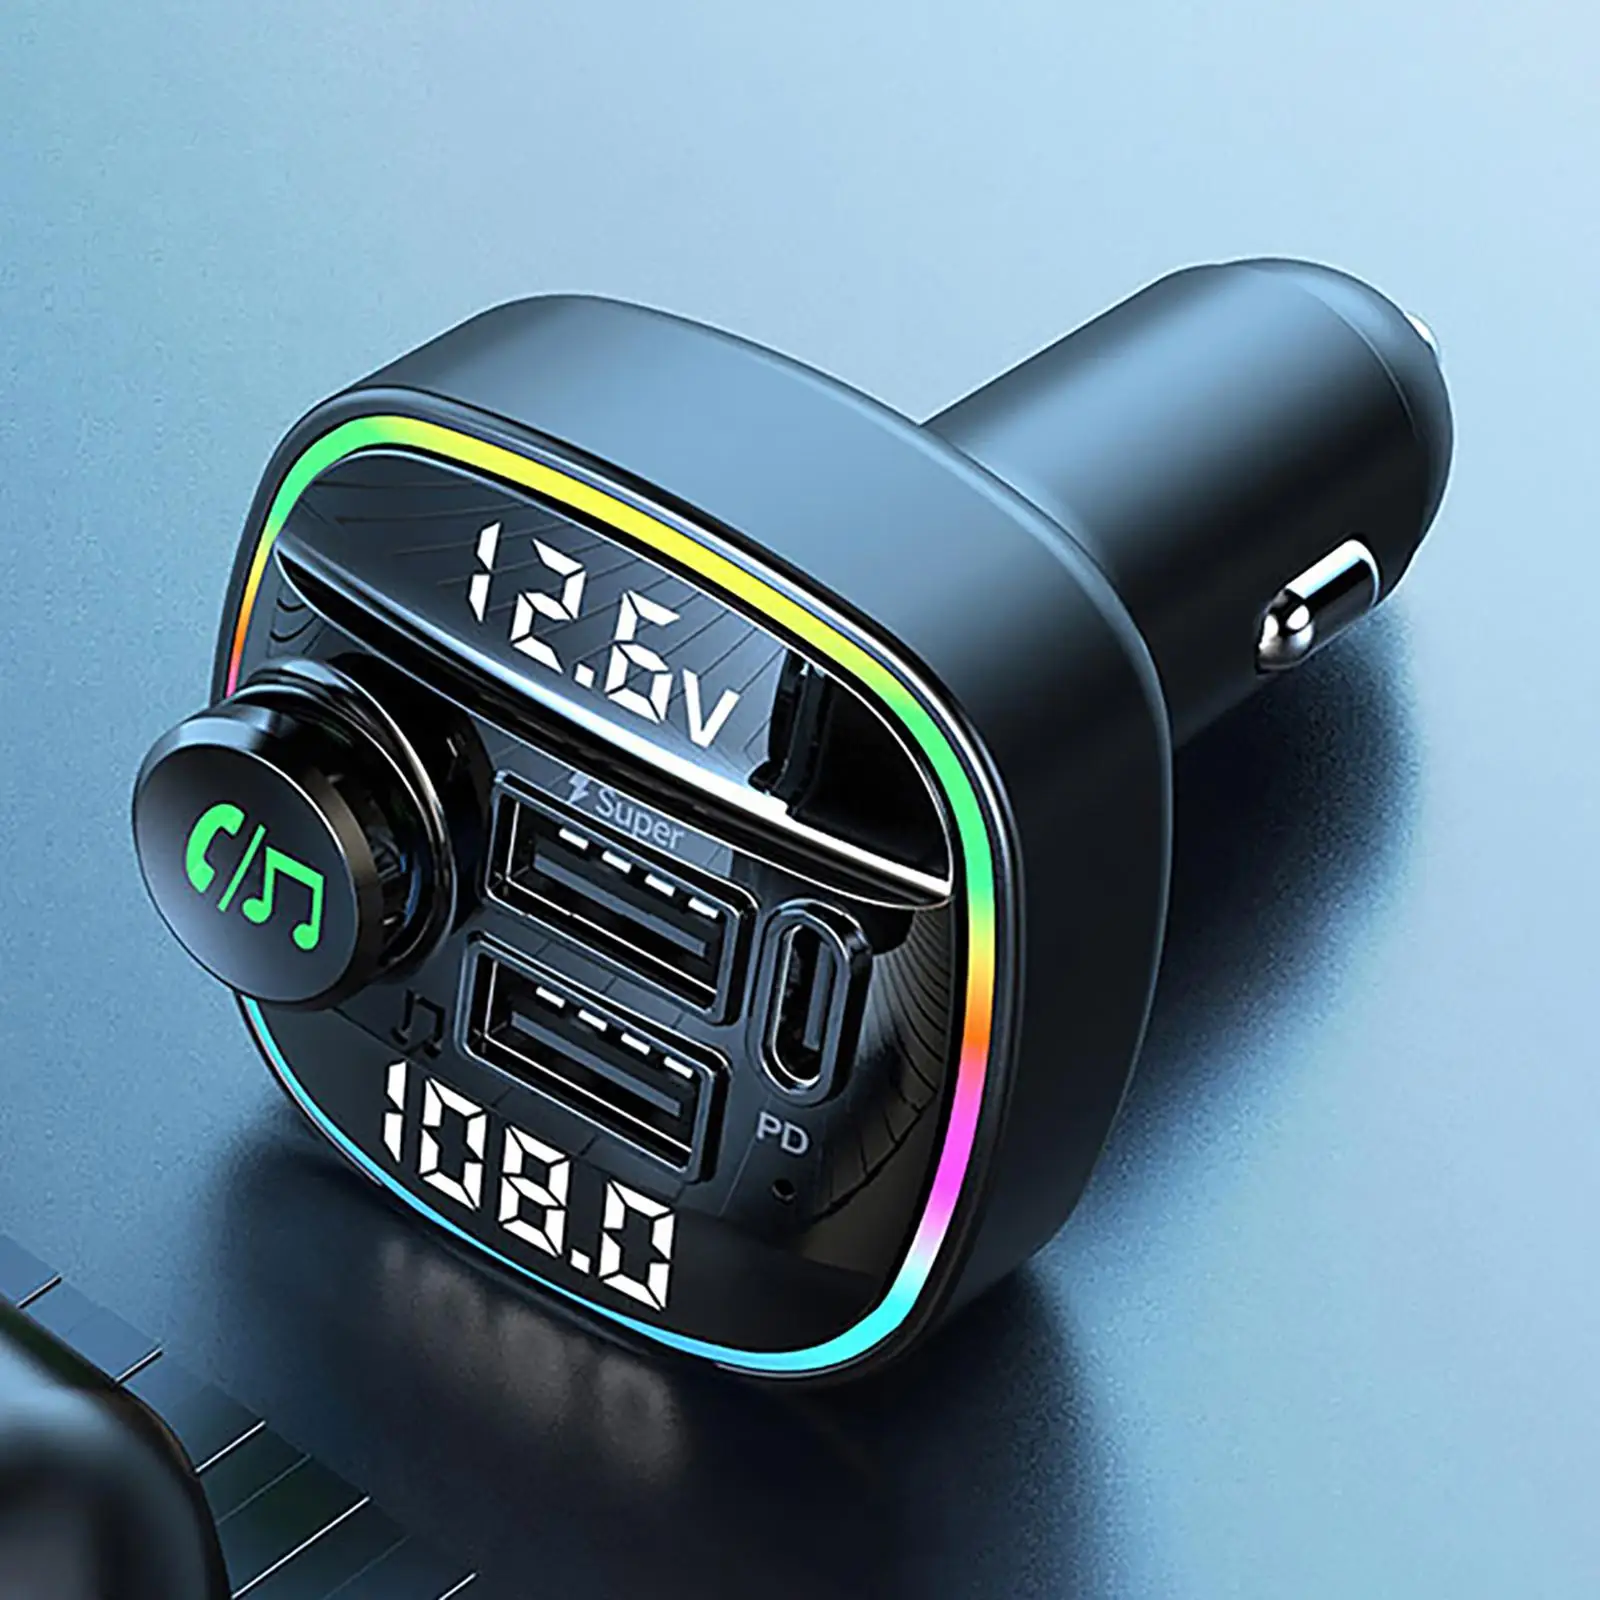 Car Charger Bluetooth 5.0 Type-C PD 20W Handsfree Wireless 7 Colors LED QC3.0 12-24 V Fast USB Charger for Nokia Mobile Phones